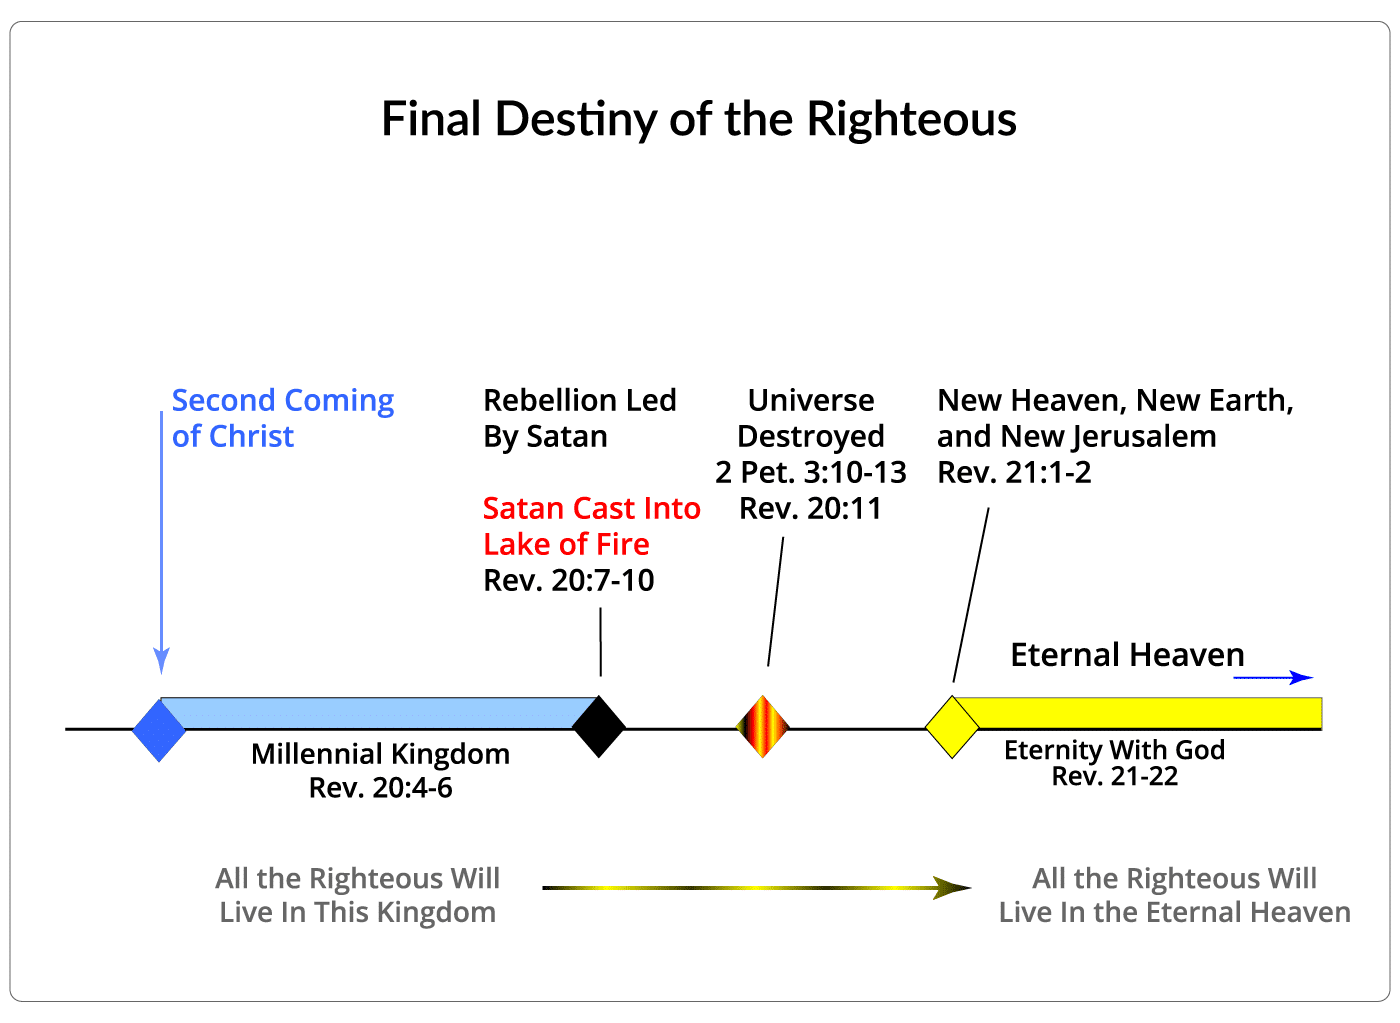 Final Destiny of the Righteous Dead